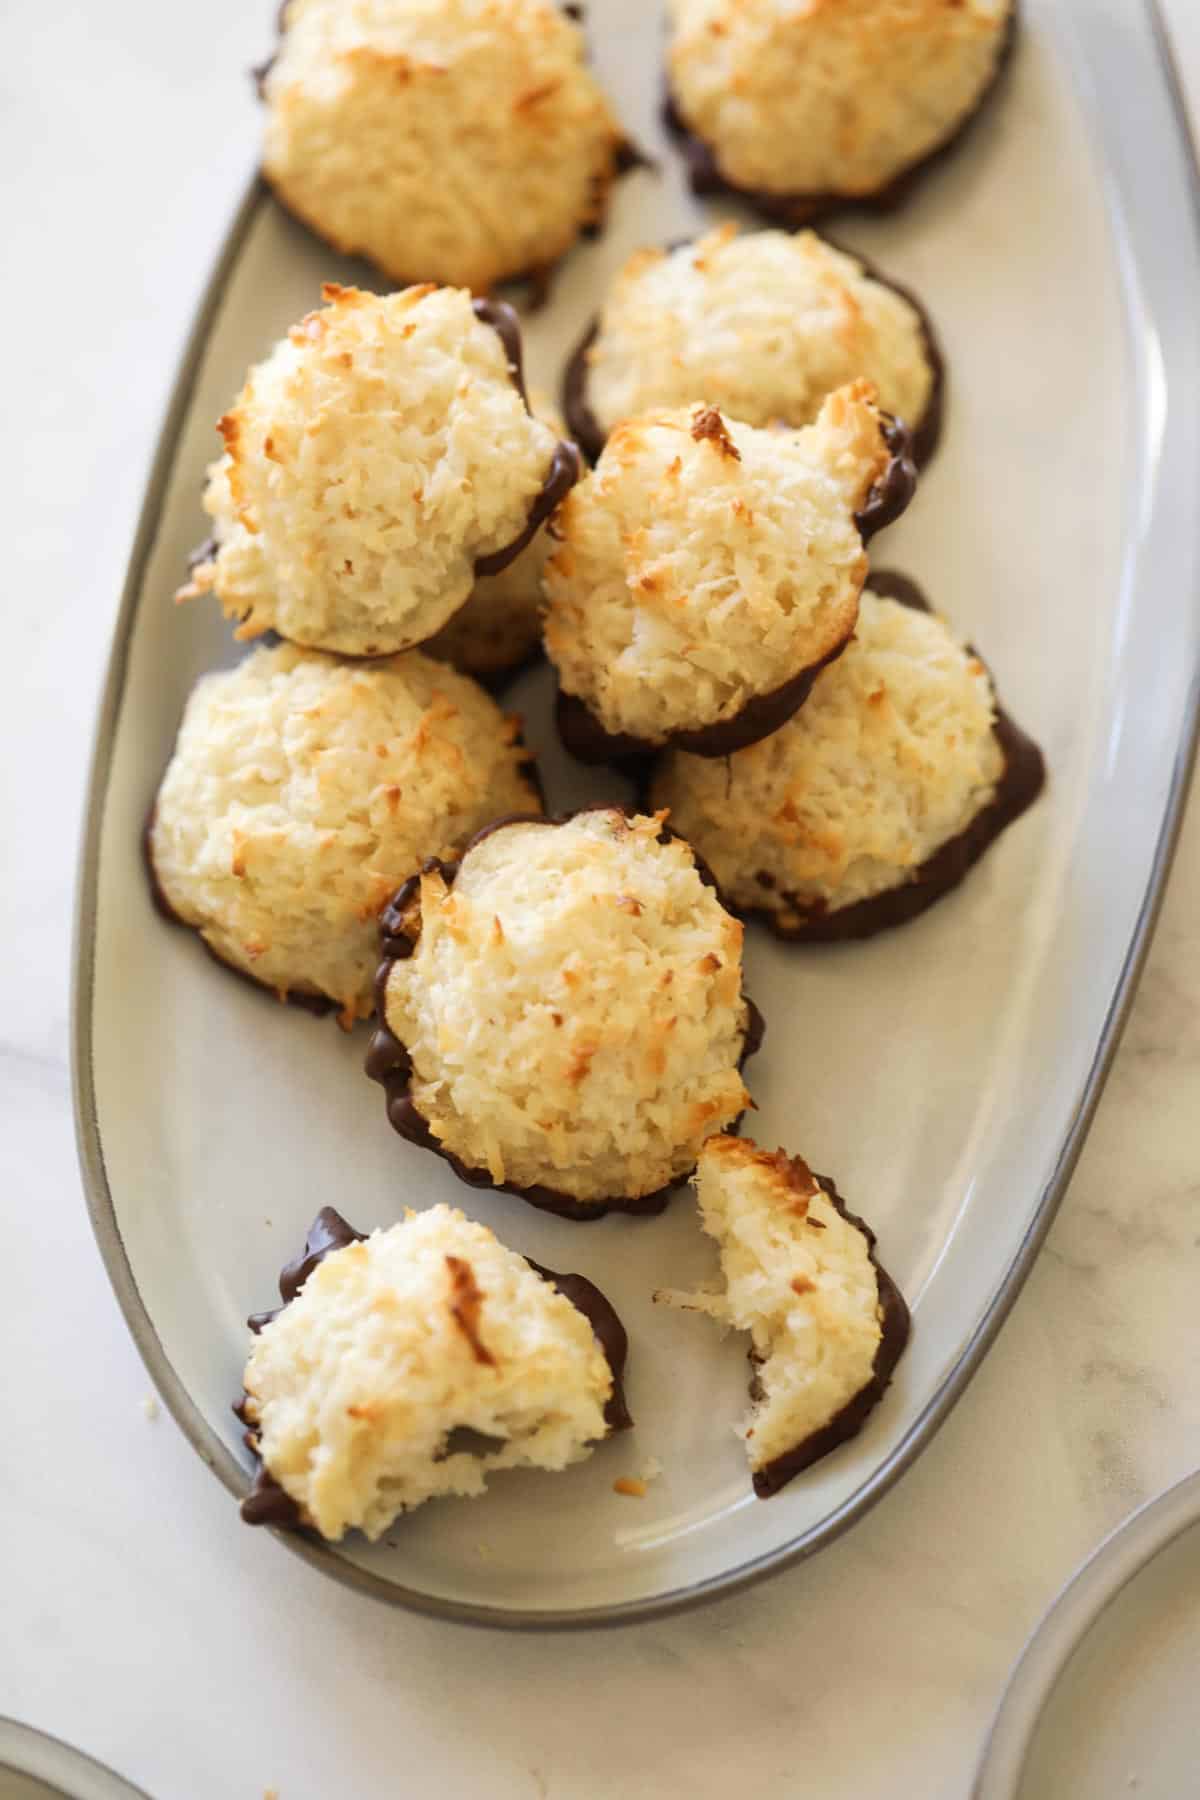 a platter of coconut cookies dipped in chocolate